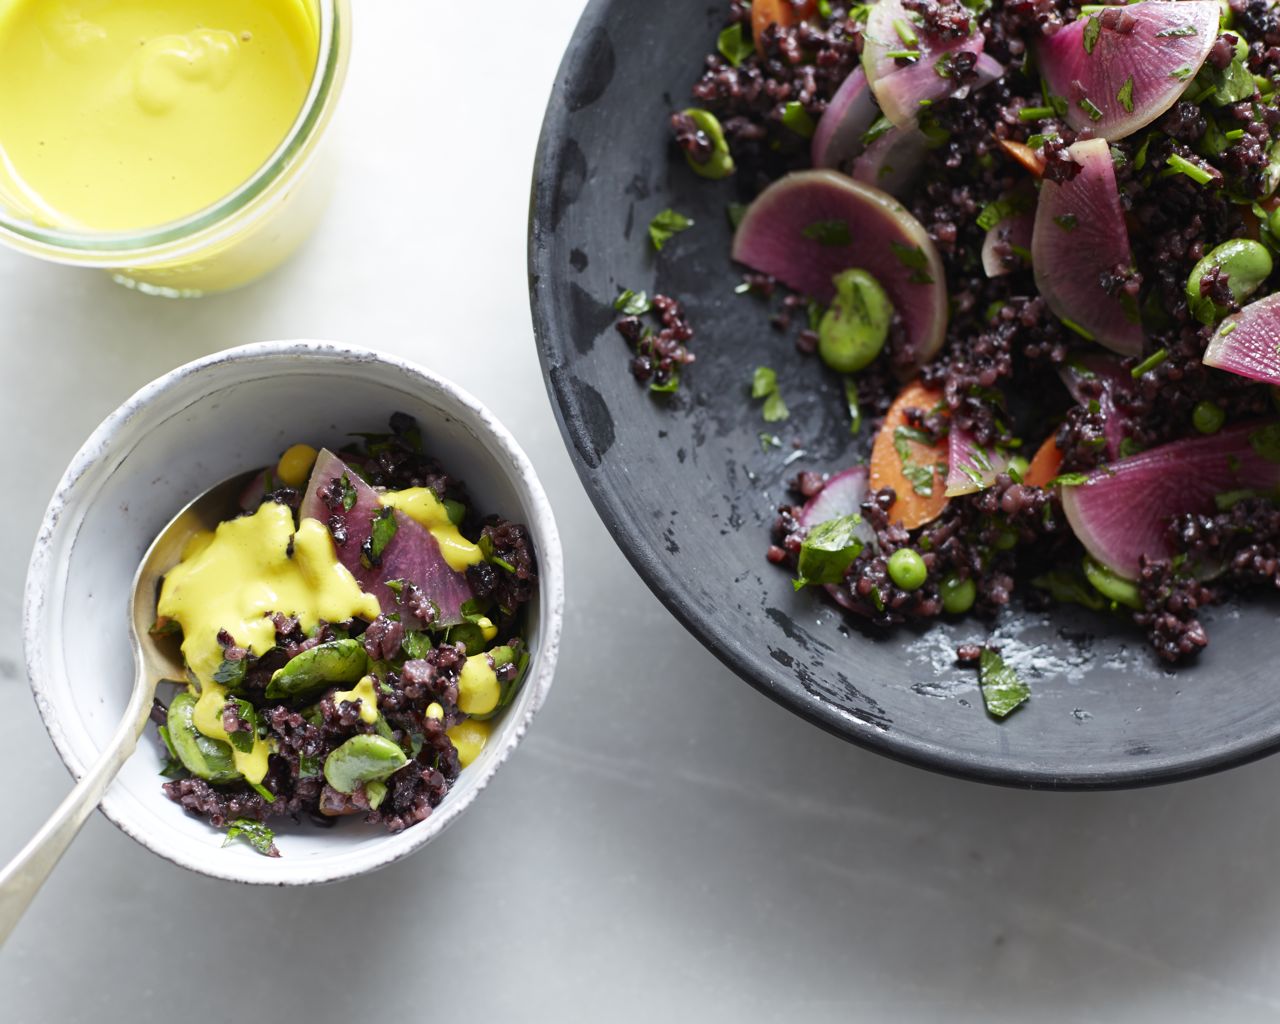 Bright turmeric dressing and a spring black rice salad